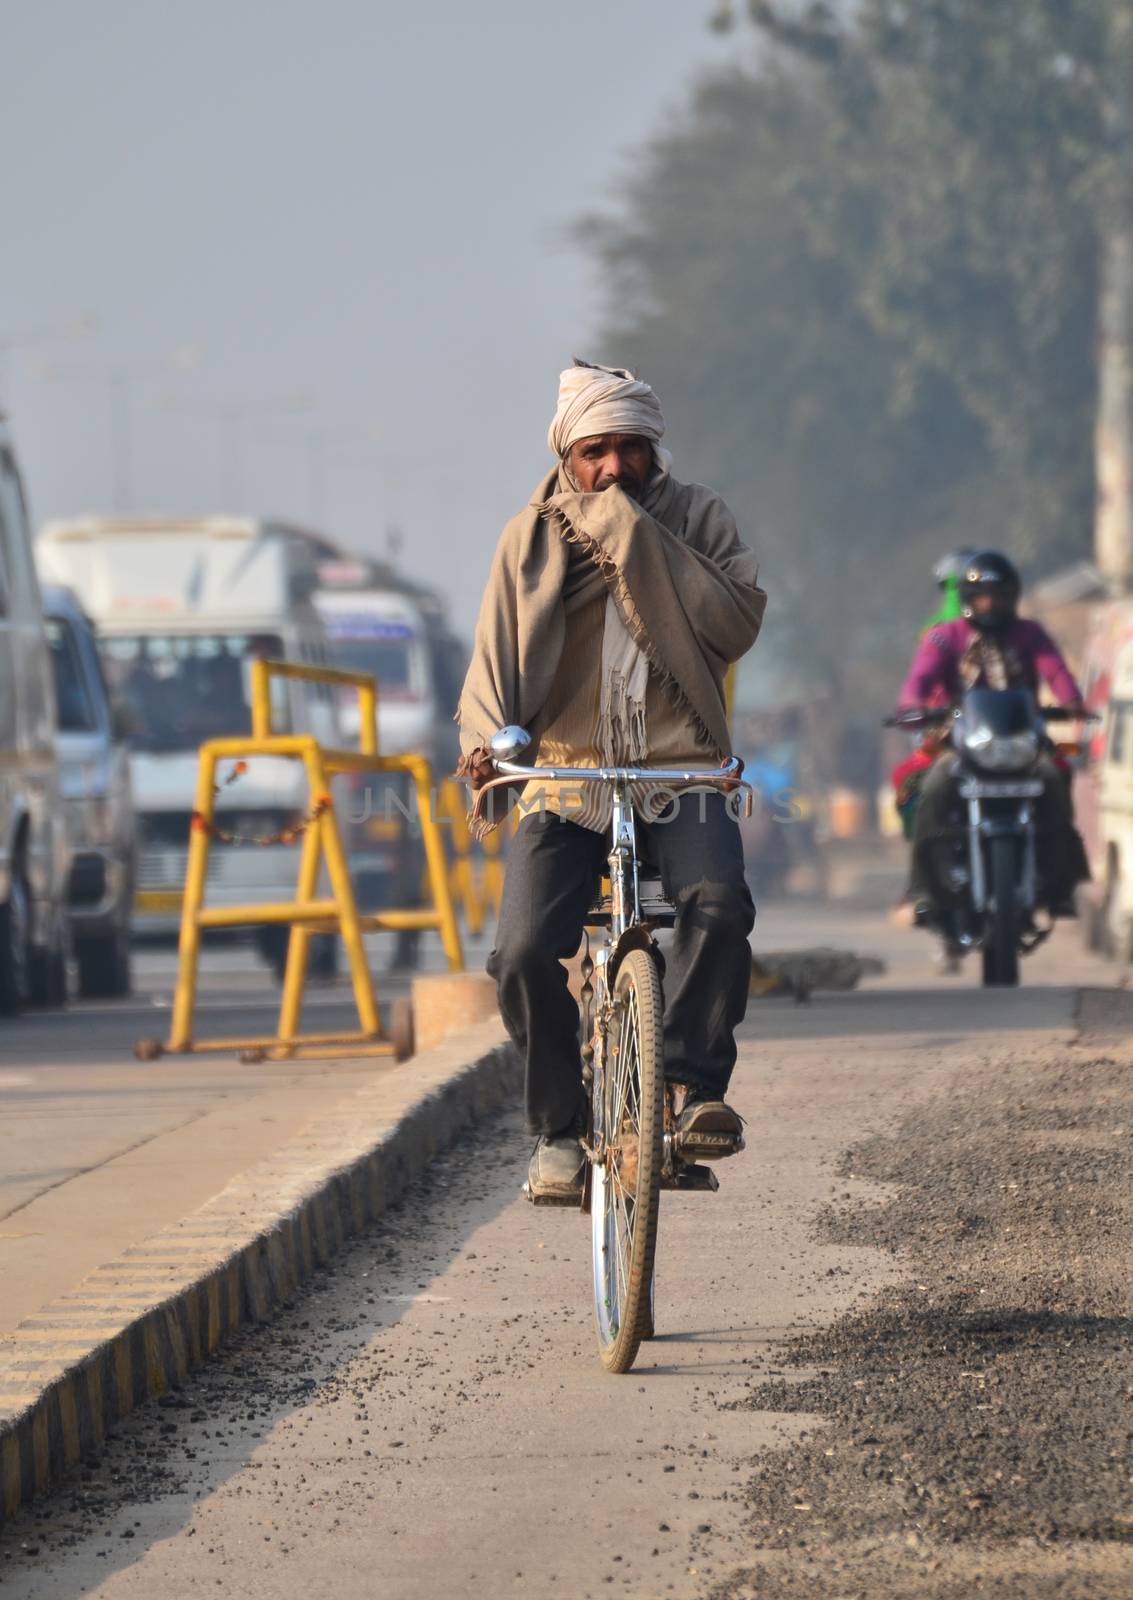 Jaipur, India - December 30, 2014: Indian people riding a bicycle in Jaipur by siraanamwong